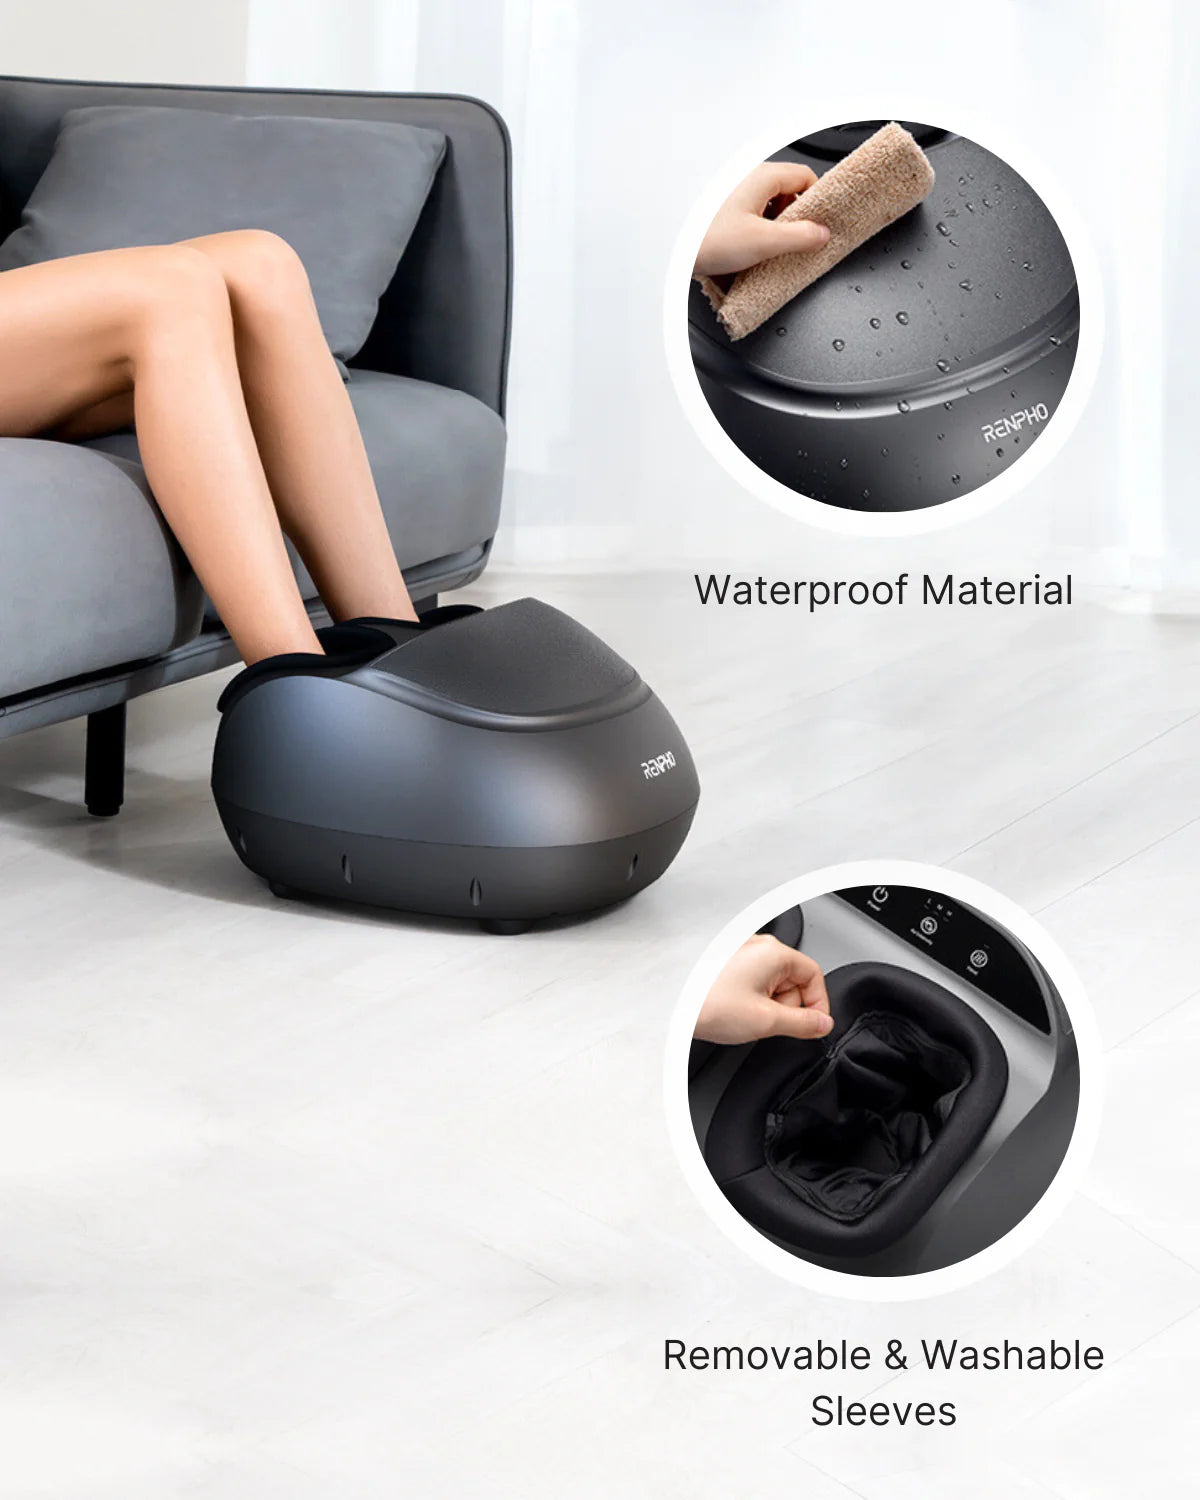 A collage of three images: top shows a person's legs resting on a black Renpho EU Shiatsu Foot Massager Premium by a sofa, middle highlights the waterproof material of the massager with a wet sponge, and bottom features